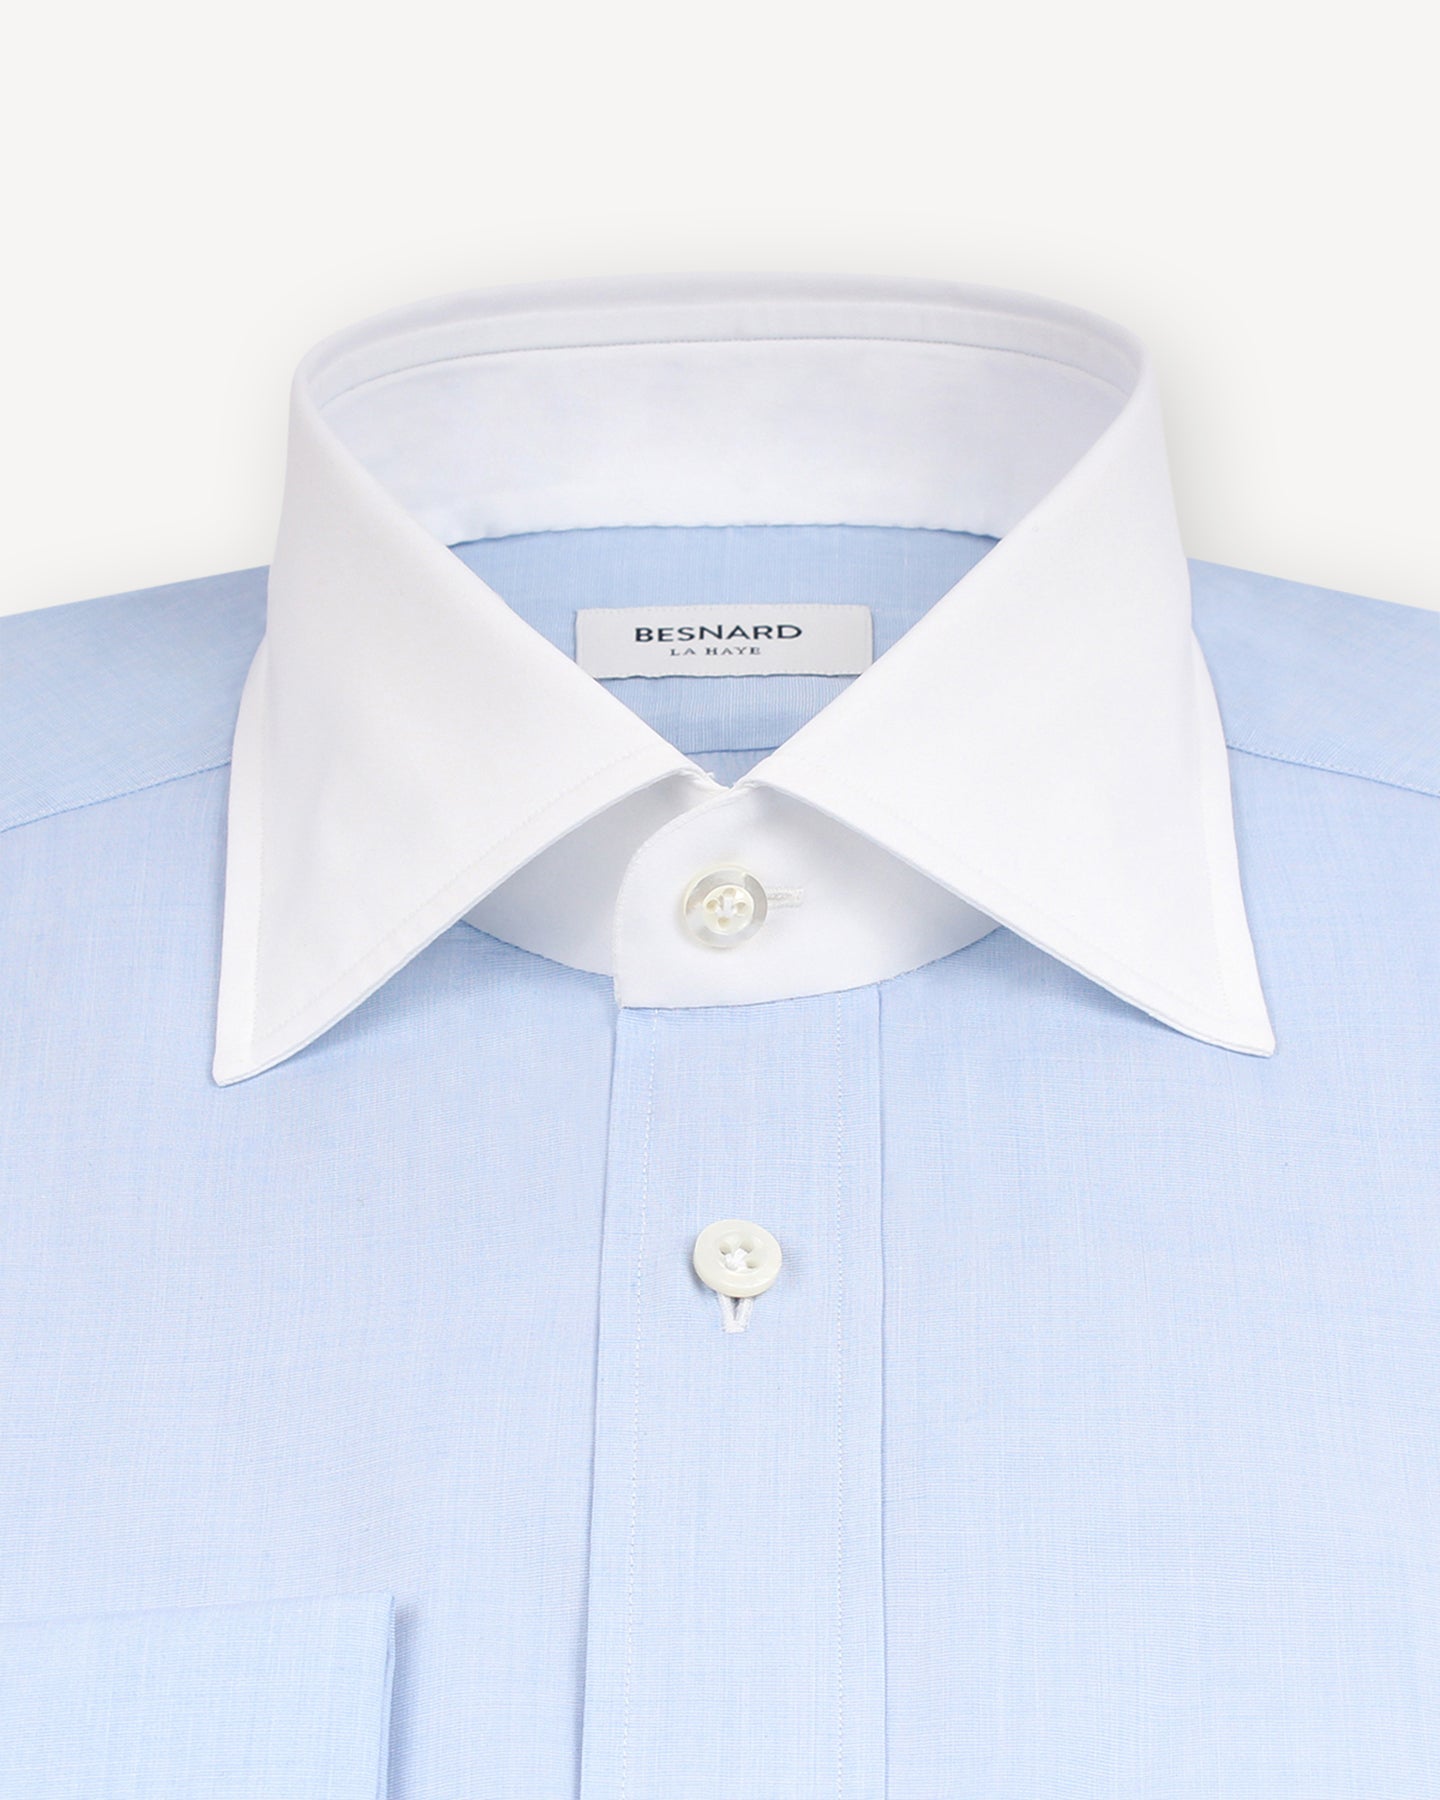 Blue end-on-end spread collar shirt with white contrast collar